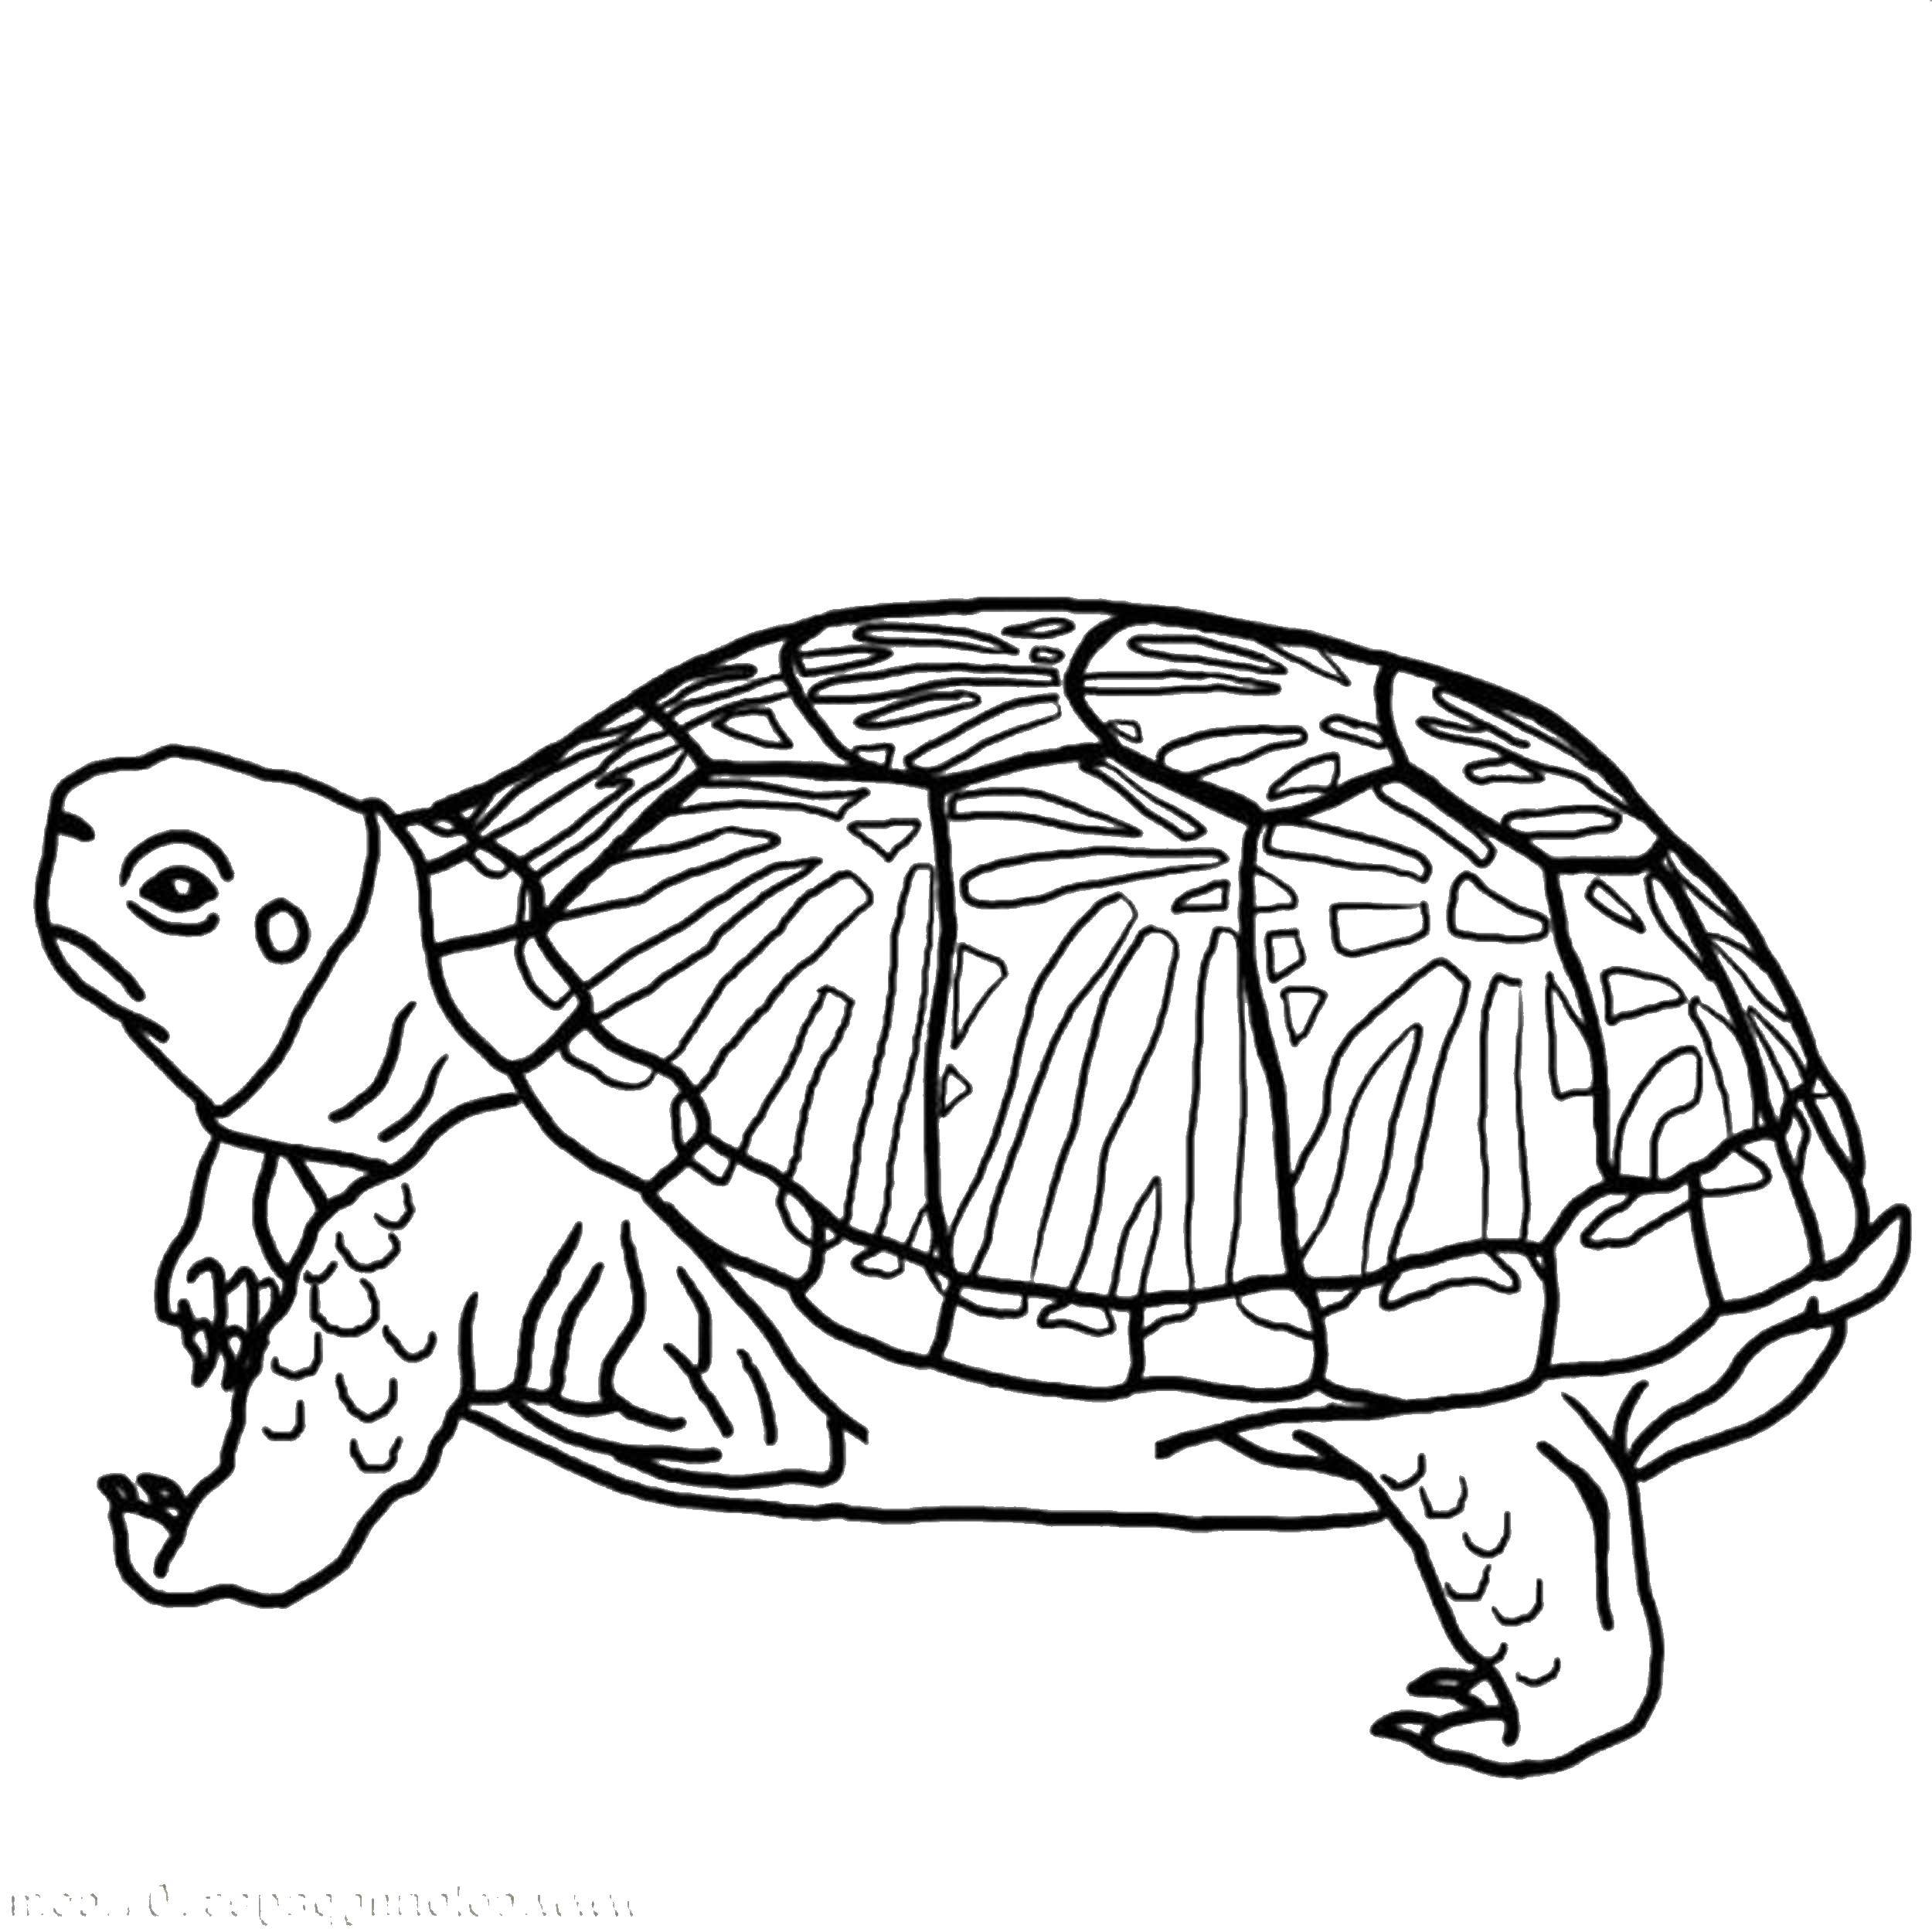 Coloring Old turtle. Category reptiles. Tags:  Reptile, turtle.